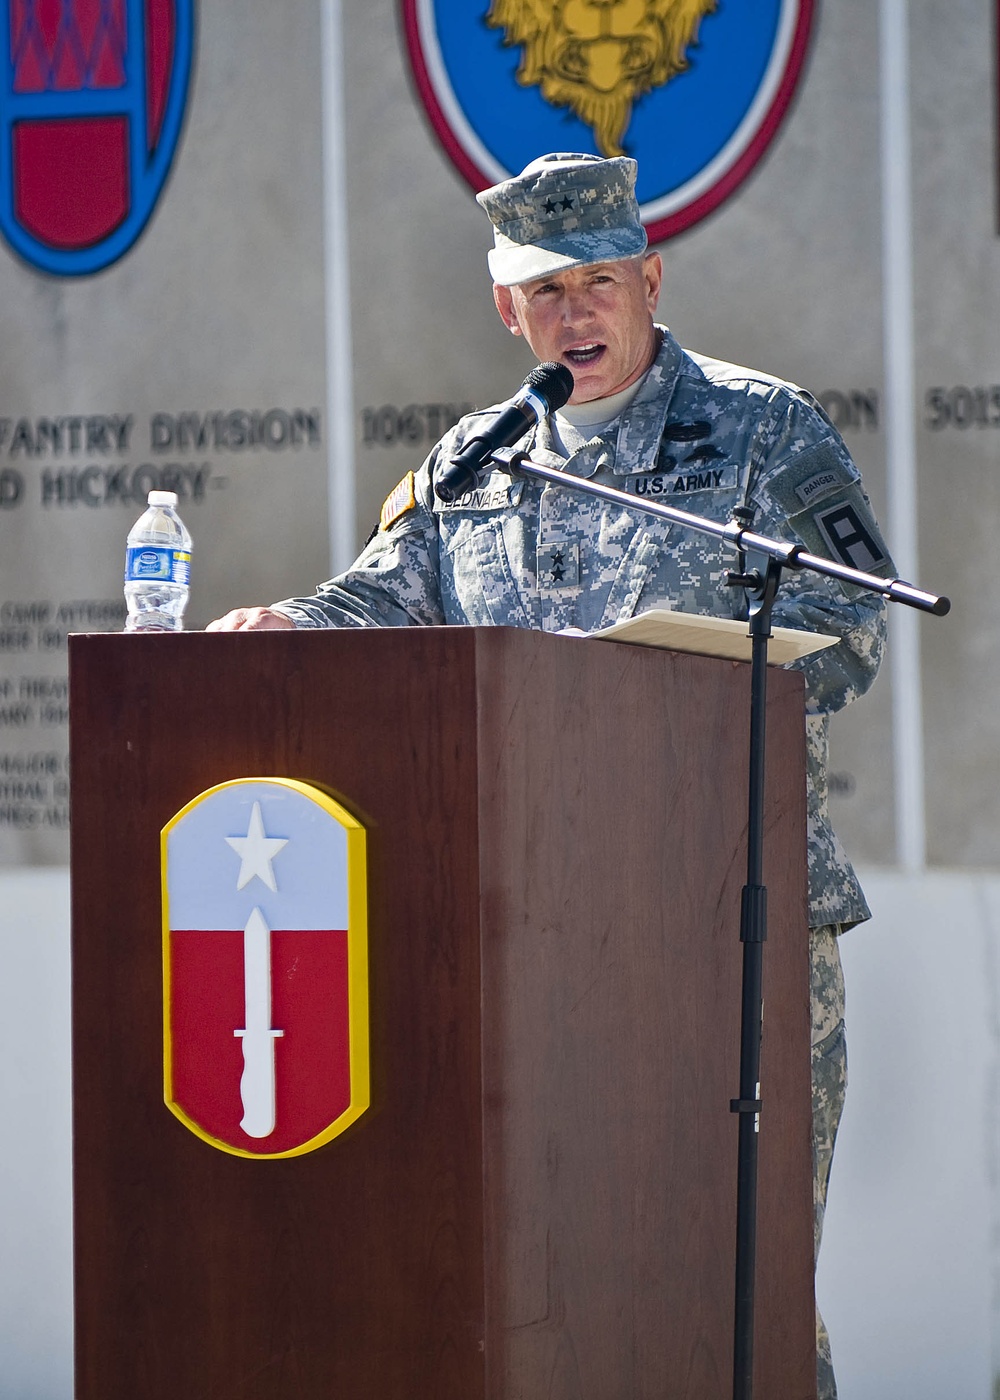 First Army Division East Commanding General Maj. Gen. J. Michael Bednarek welcomes the 205th Infantry Brigade's incoming commander at the brigade's change-of-command ceremony held at the Veteran's Memorial, Camp Atterbury Joint Maneuver Training Center in